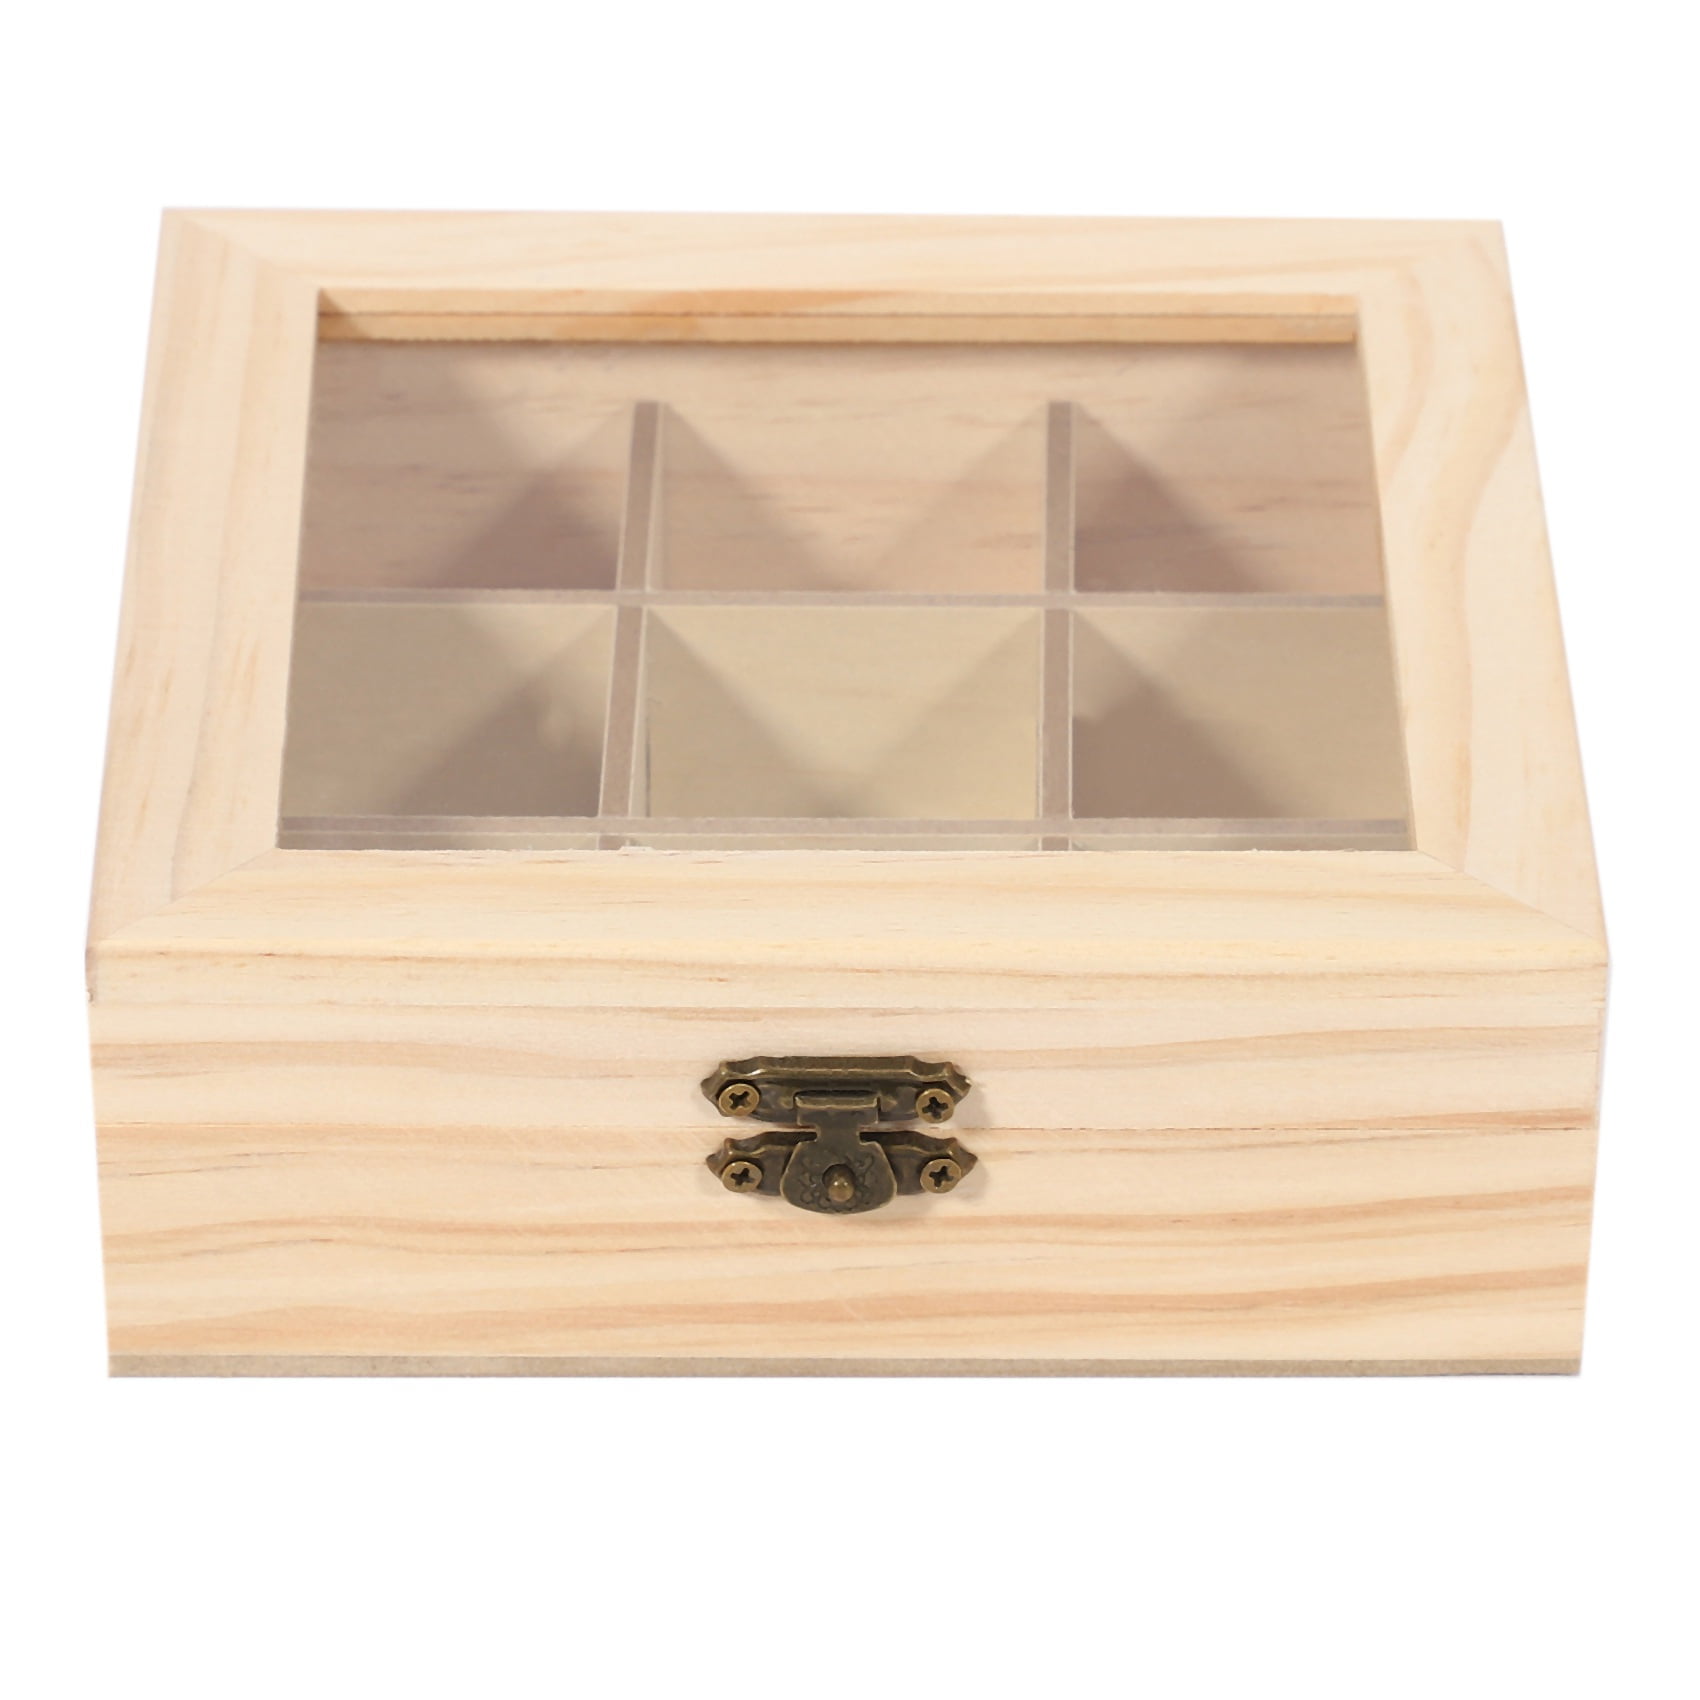 Display Box with Sliding Glass Lid 9 Compartments Plain Wood Wooden Storage 